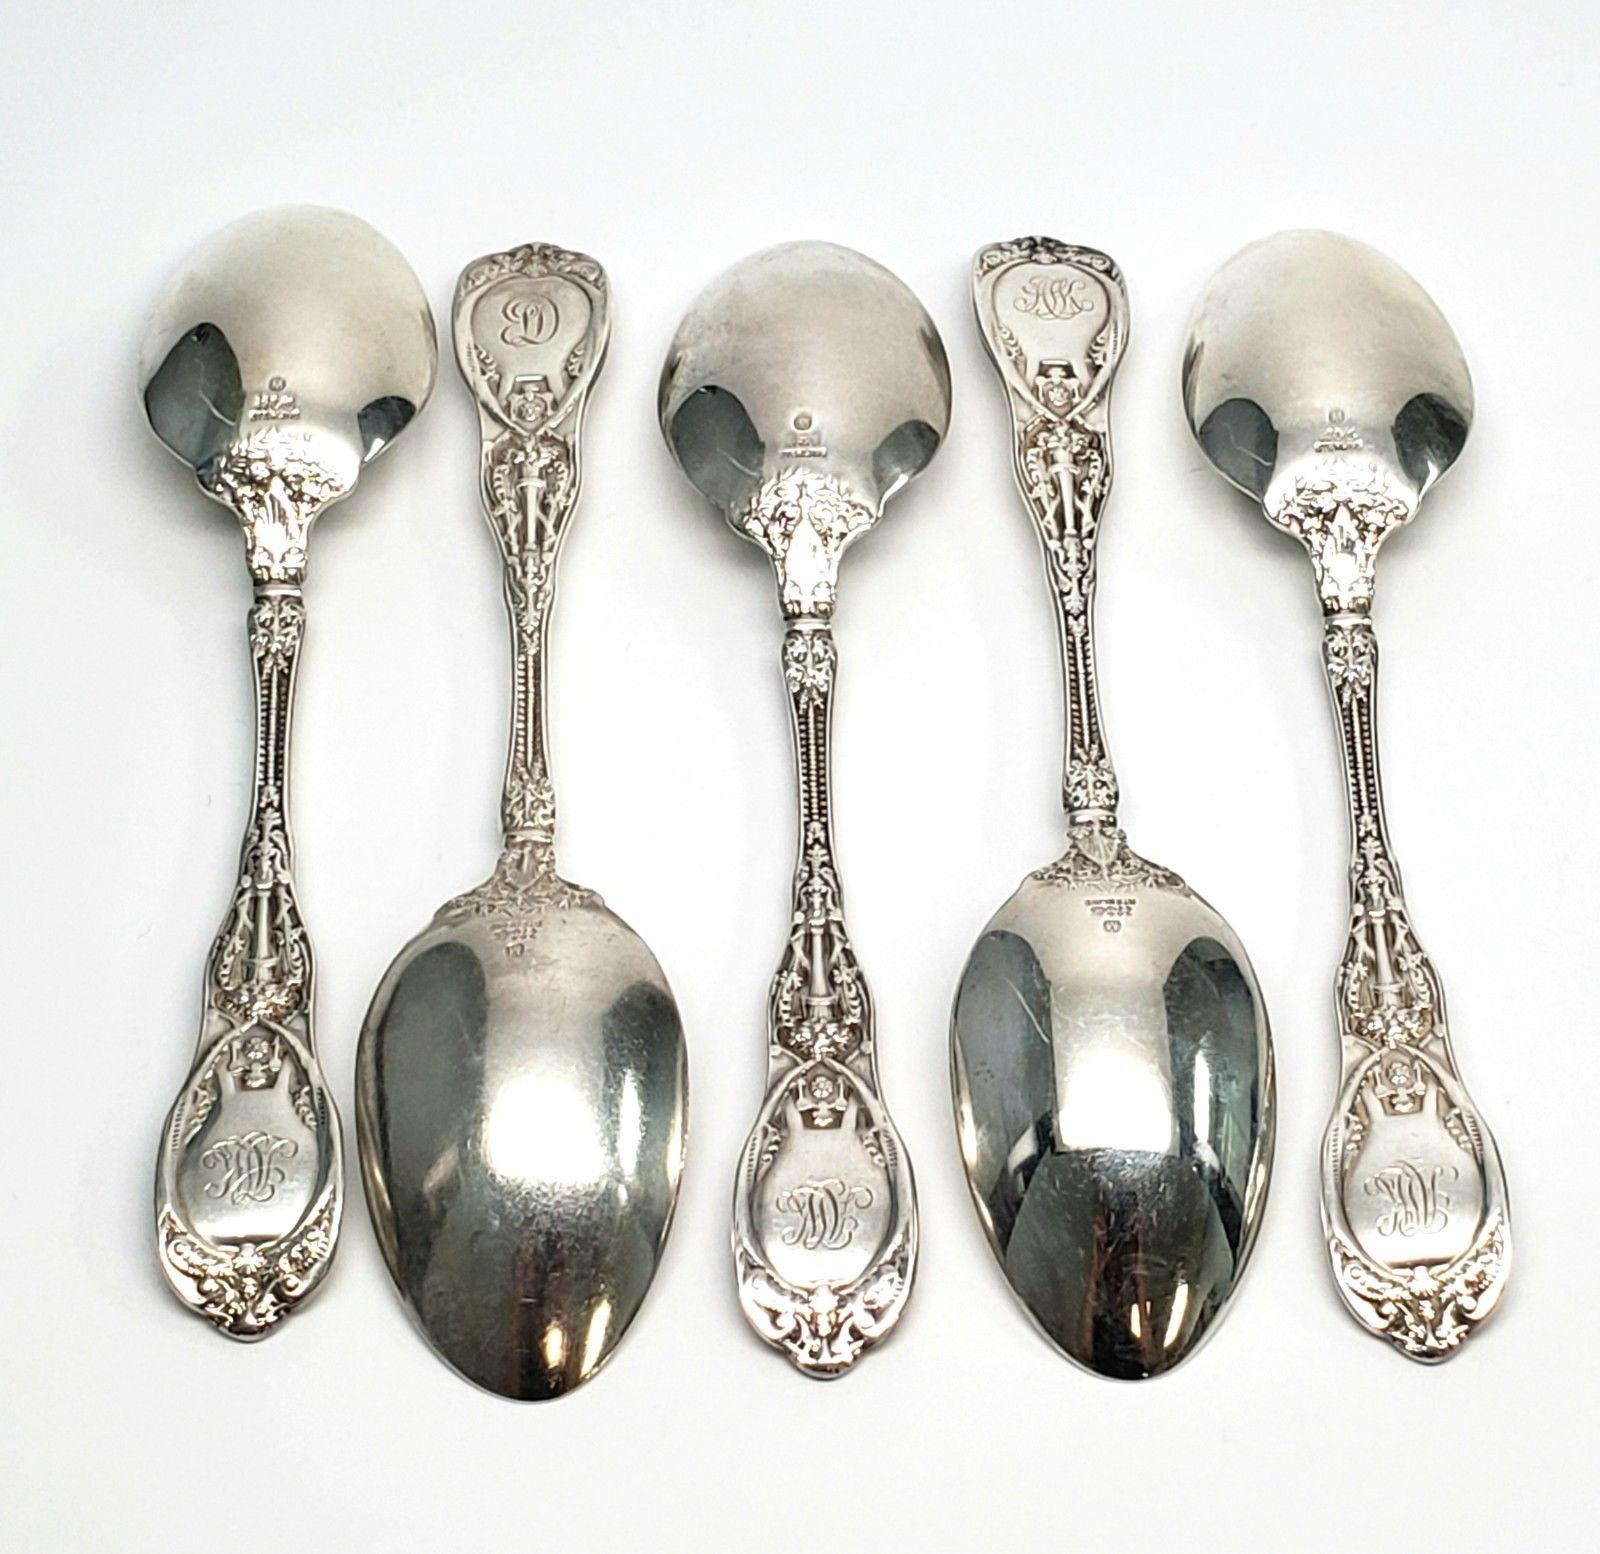 Set of 5 Gorham Mythologique sterling silver Teaspoons. Mythologique is a multiple motif pattern, this one is the old no bead border, no face bowl. Multiple monograms. 1 appears to be D, 4 appears to be AJC. Measures approx 5 7/8